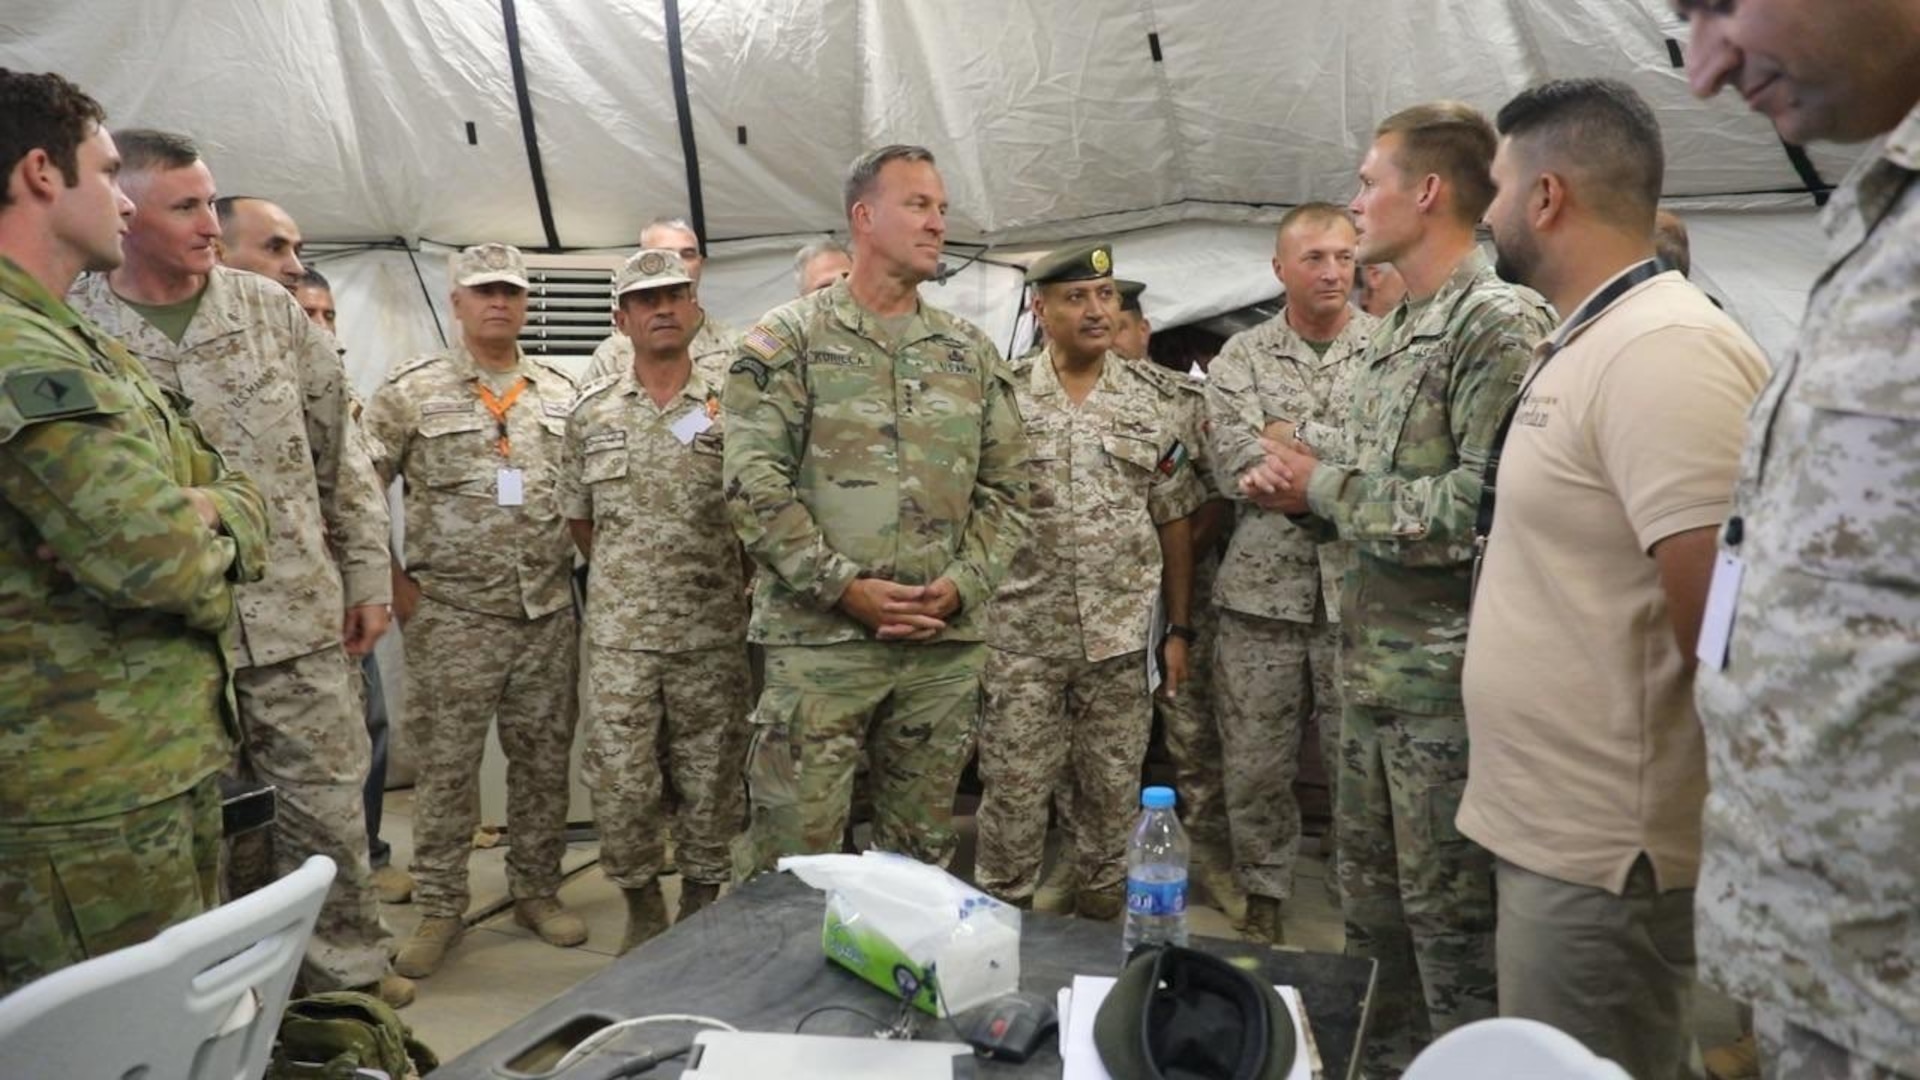 On September 12, General Michael “Erik” Kurilla, commander of U.S. Central Command, traveled to Amman, Jordan to observe Eager Lion 22, the tenth iteration of a biannual multinational training event, which began September 5th and continues through September 15th.